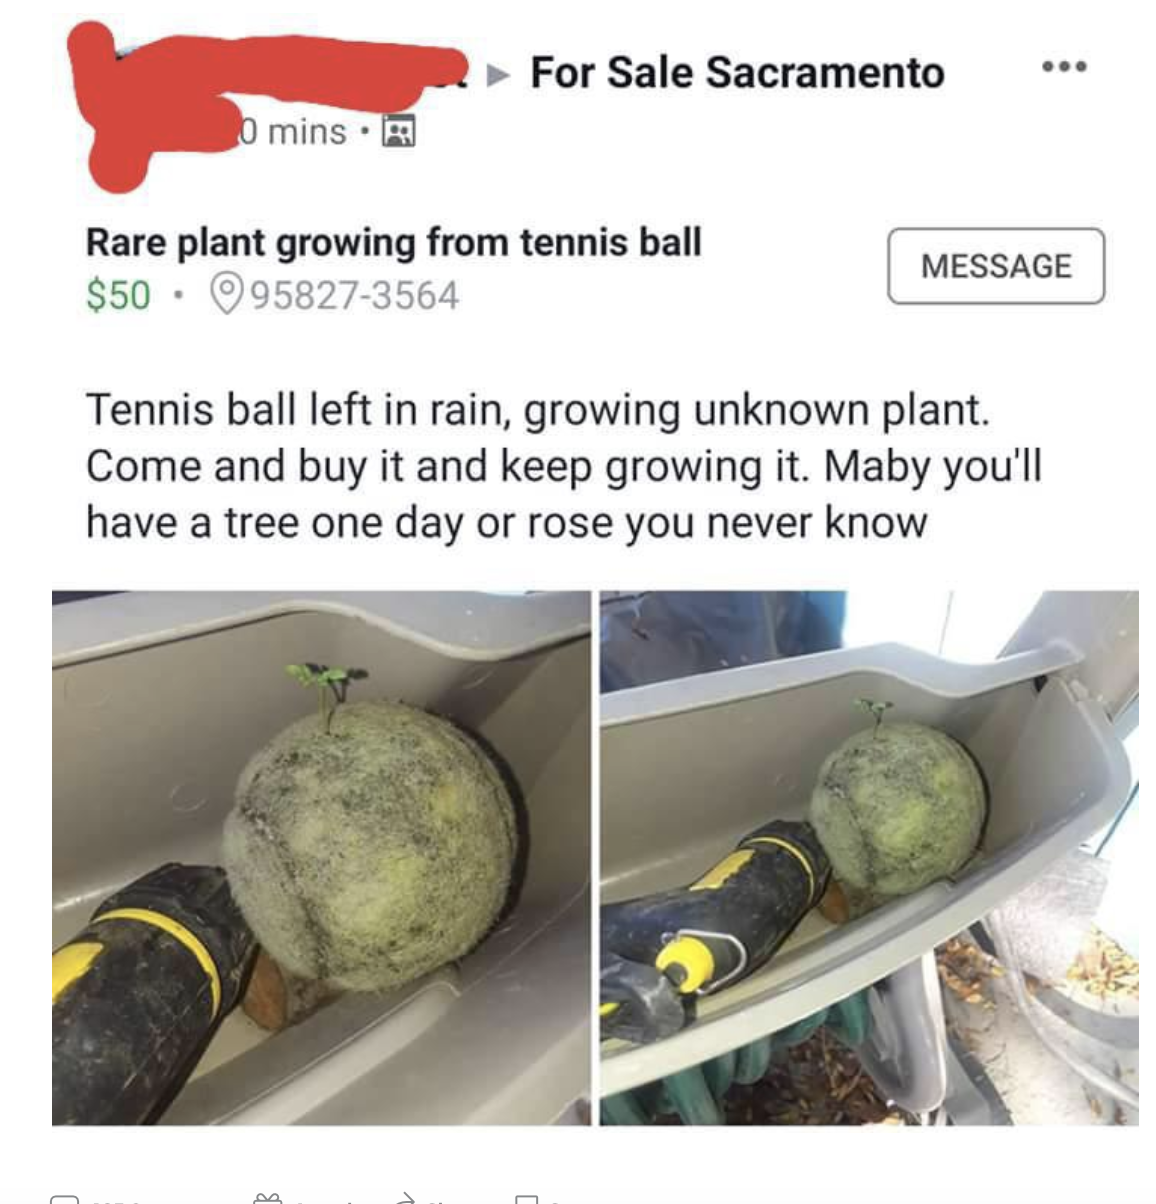 A person trying to sell a tennis ball left out in the rain